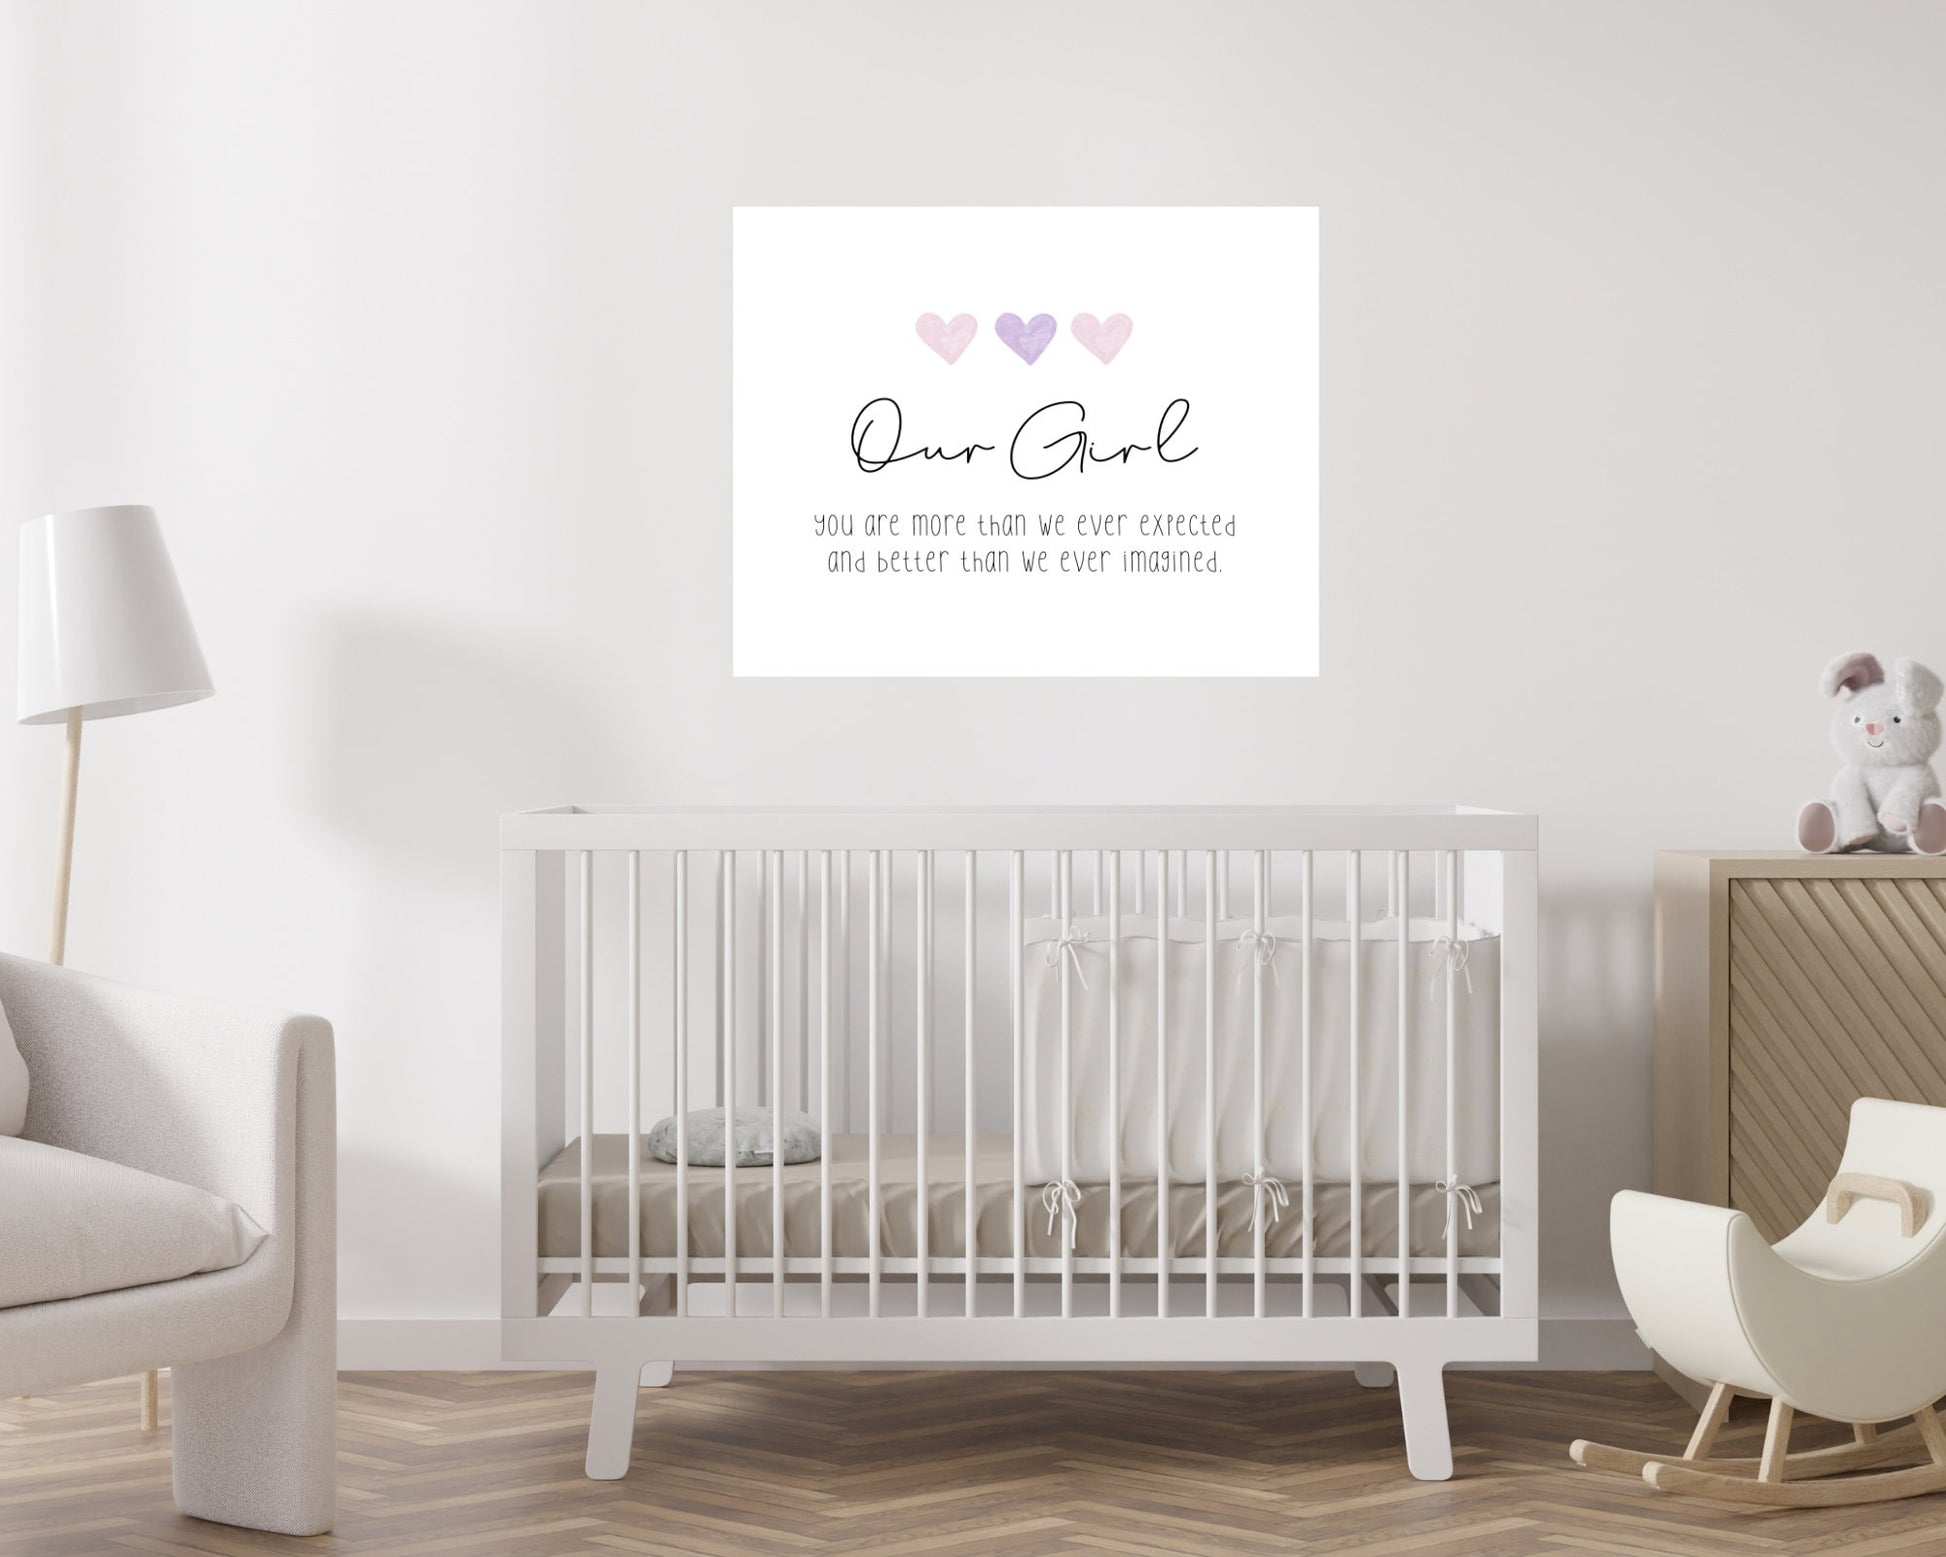 A digital print is hung above a baby’s cradle. The digital print has three hearts at the top, and a piece of writing that says: “Our girl, you are more than we ever expected and better than we ever imagined.”